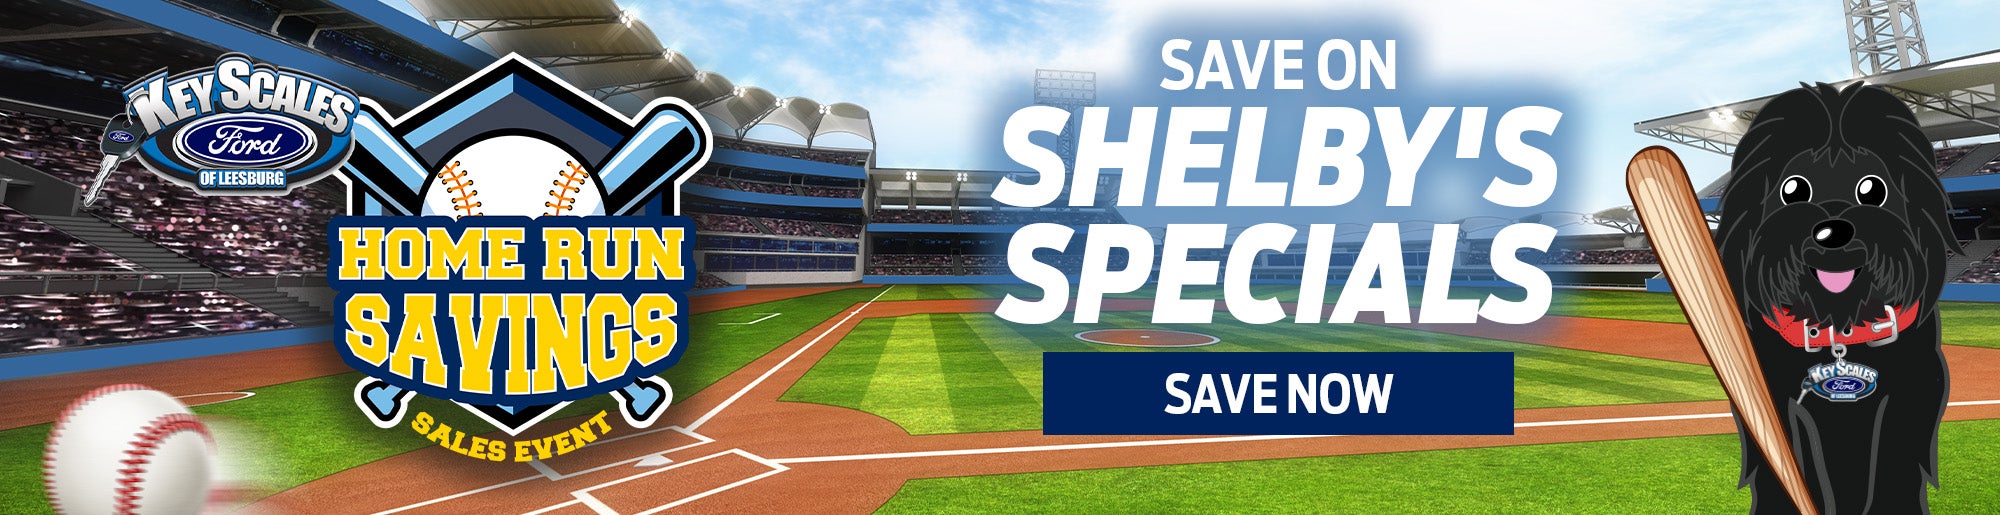 Save on Shelby's Specials